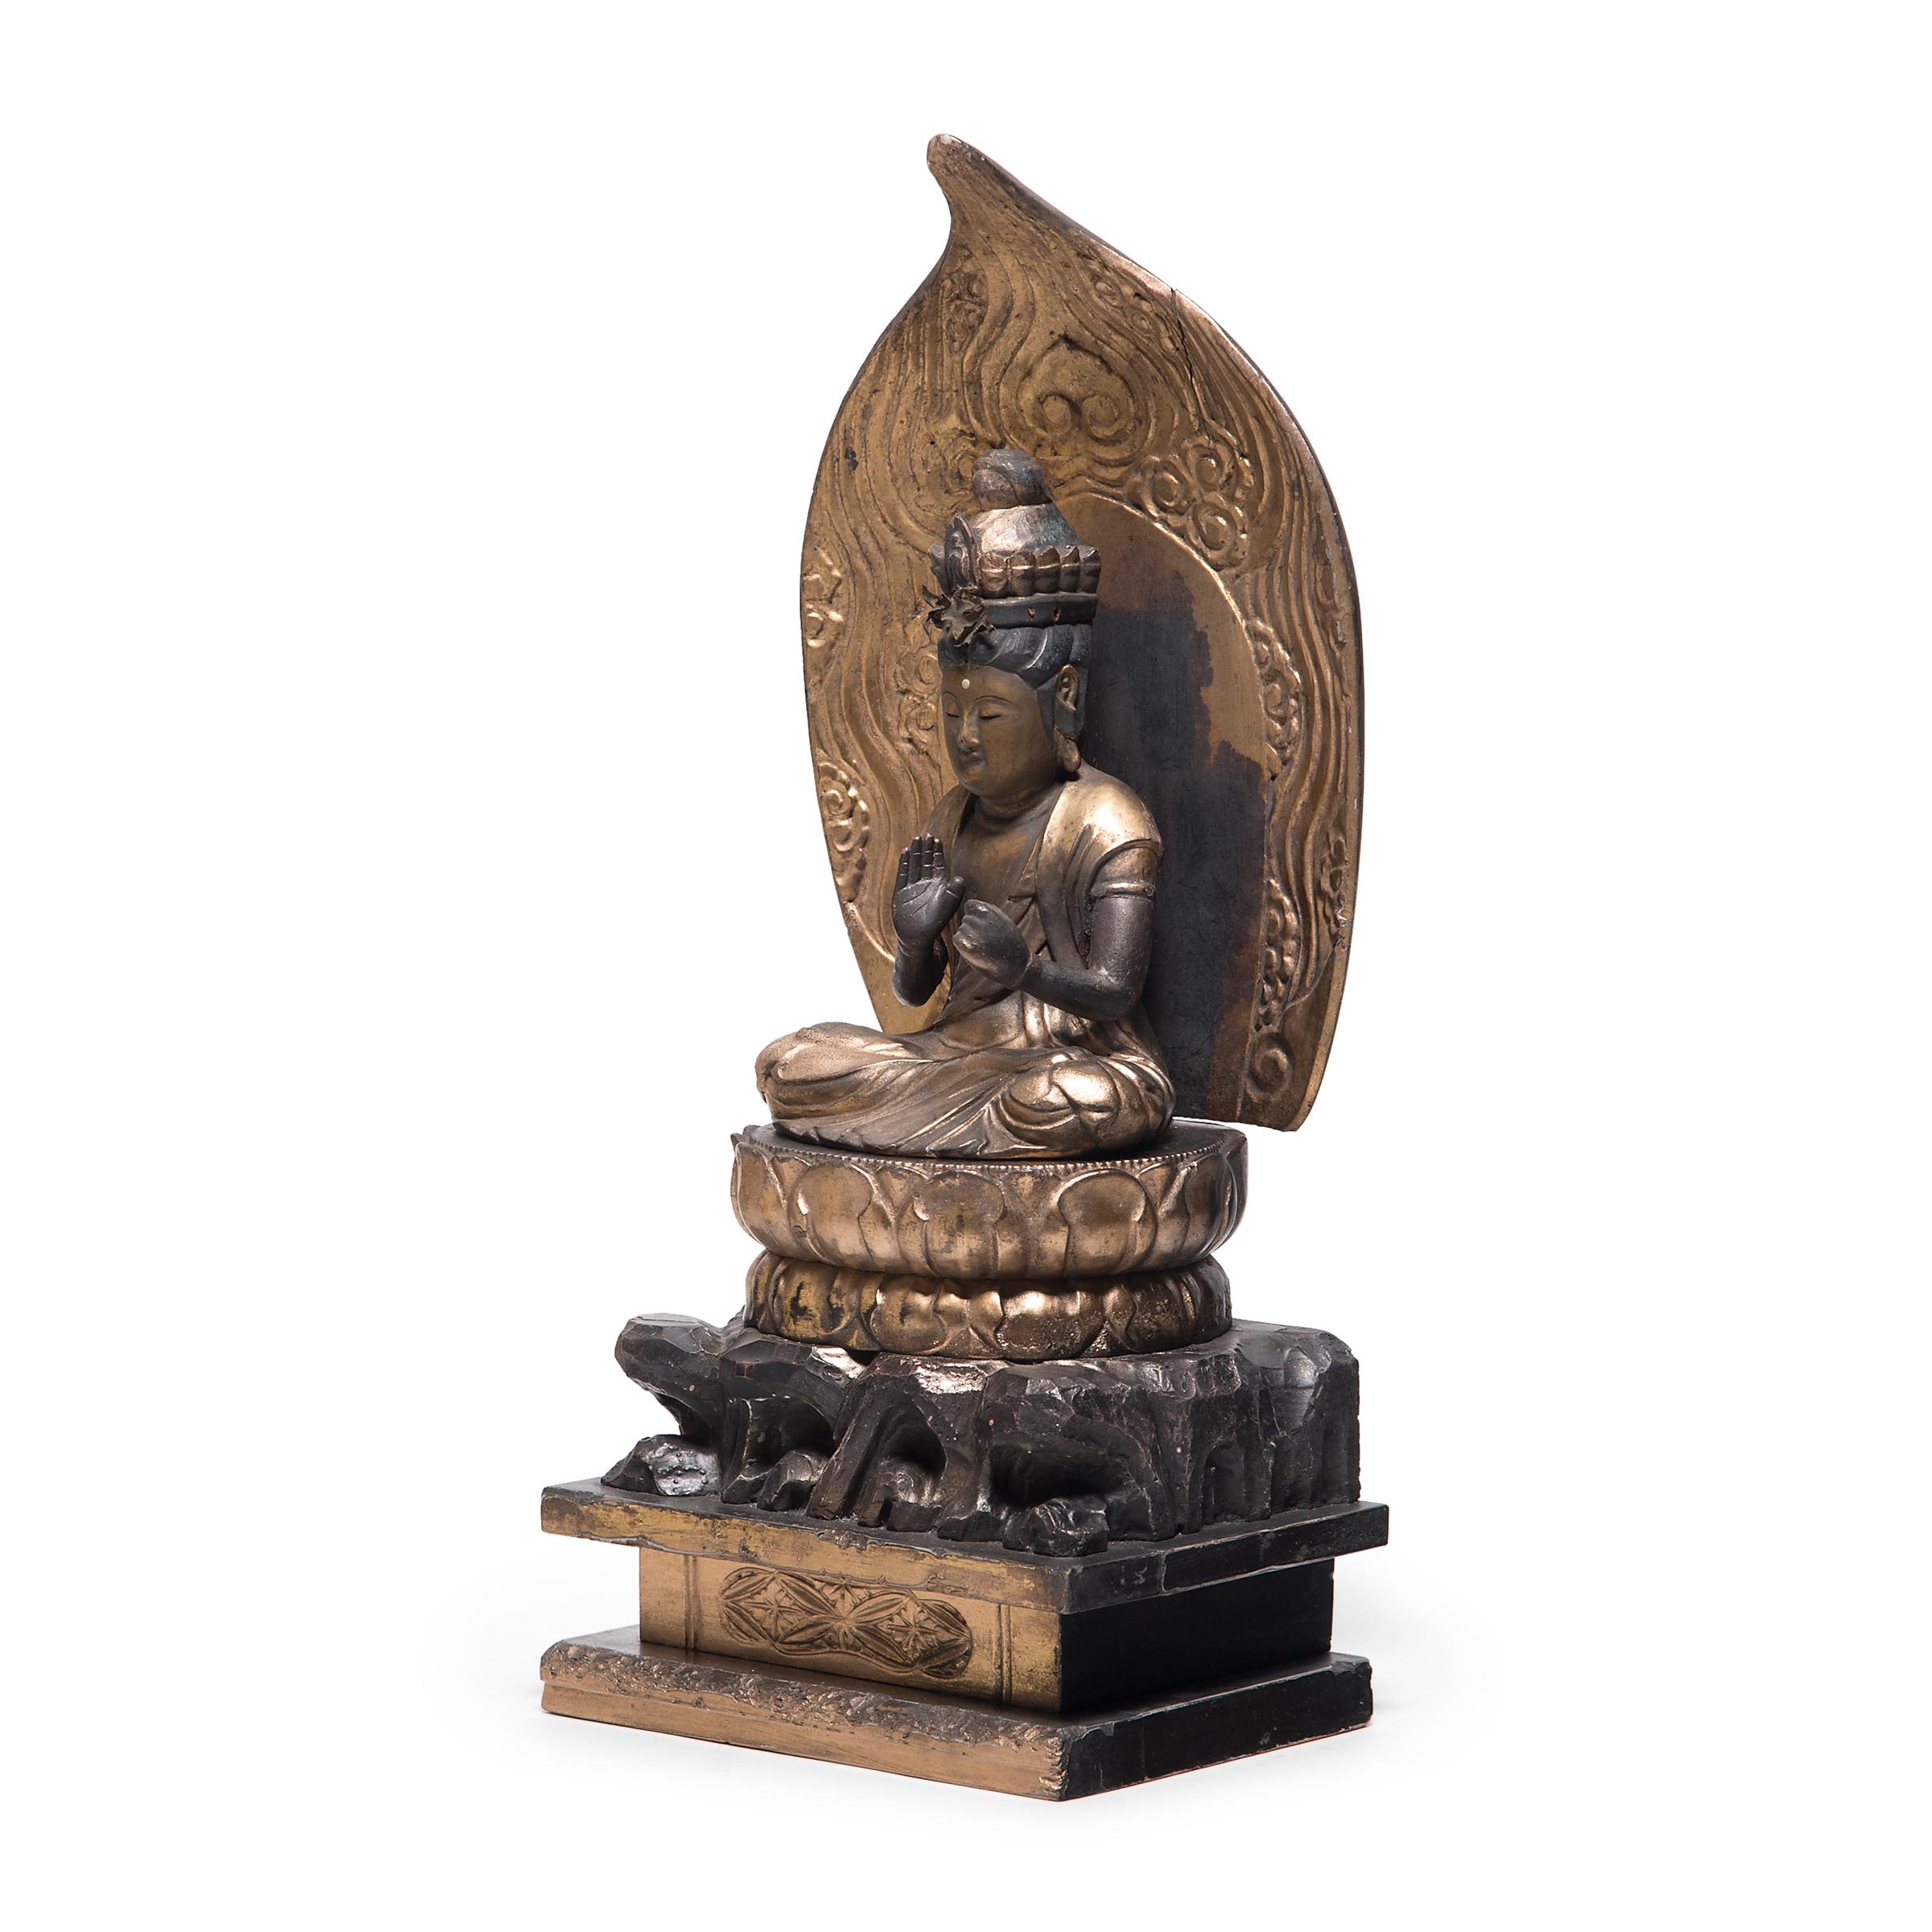 Intricately carved and finished with gilt black lacquer, this seated figure depicts the bodhisattva Guanyin, known in Japanese Buddhism as Kannon. Described as the 